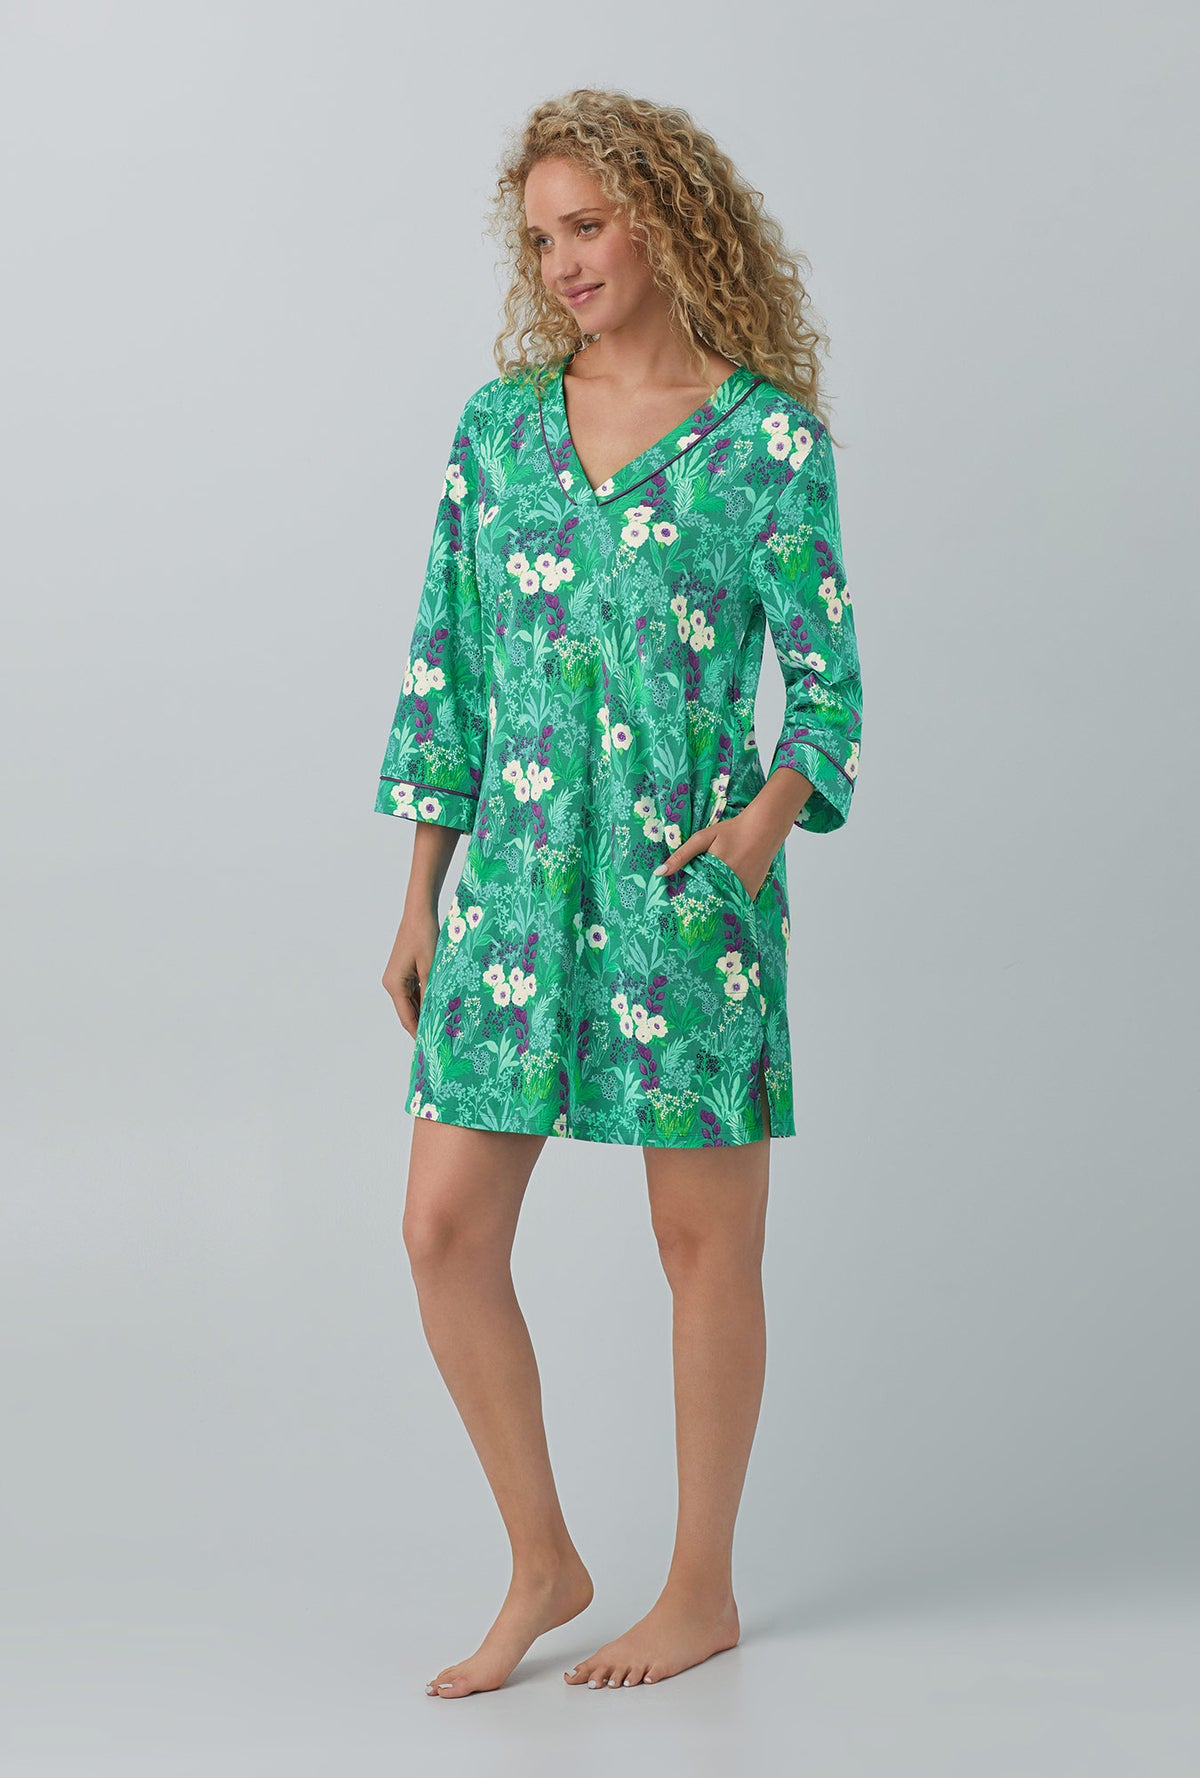 A lady wearing green  3/4 Sleeve Stretch Jersey Sleepshirt with Wintergreens  print